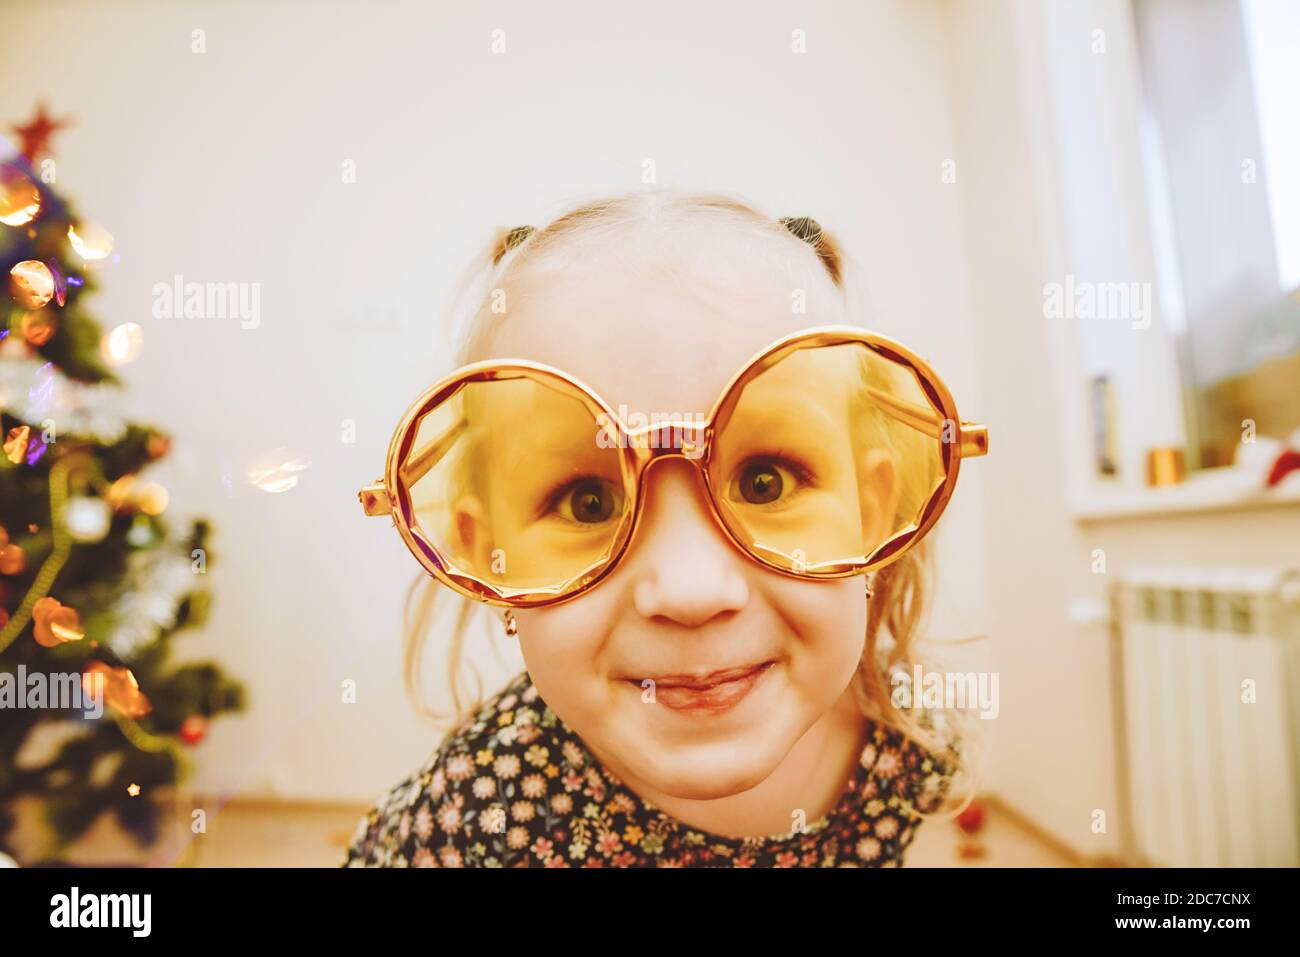 Little girl wearing gold masquerade glasses smiling, fooling around. Happy 2021 Stock Photo